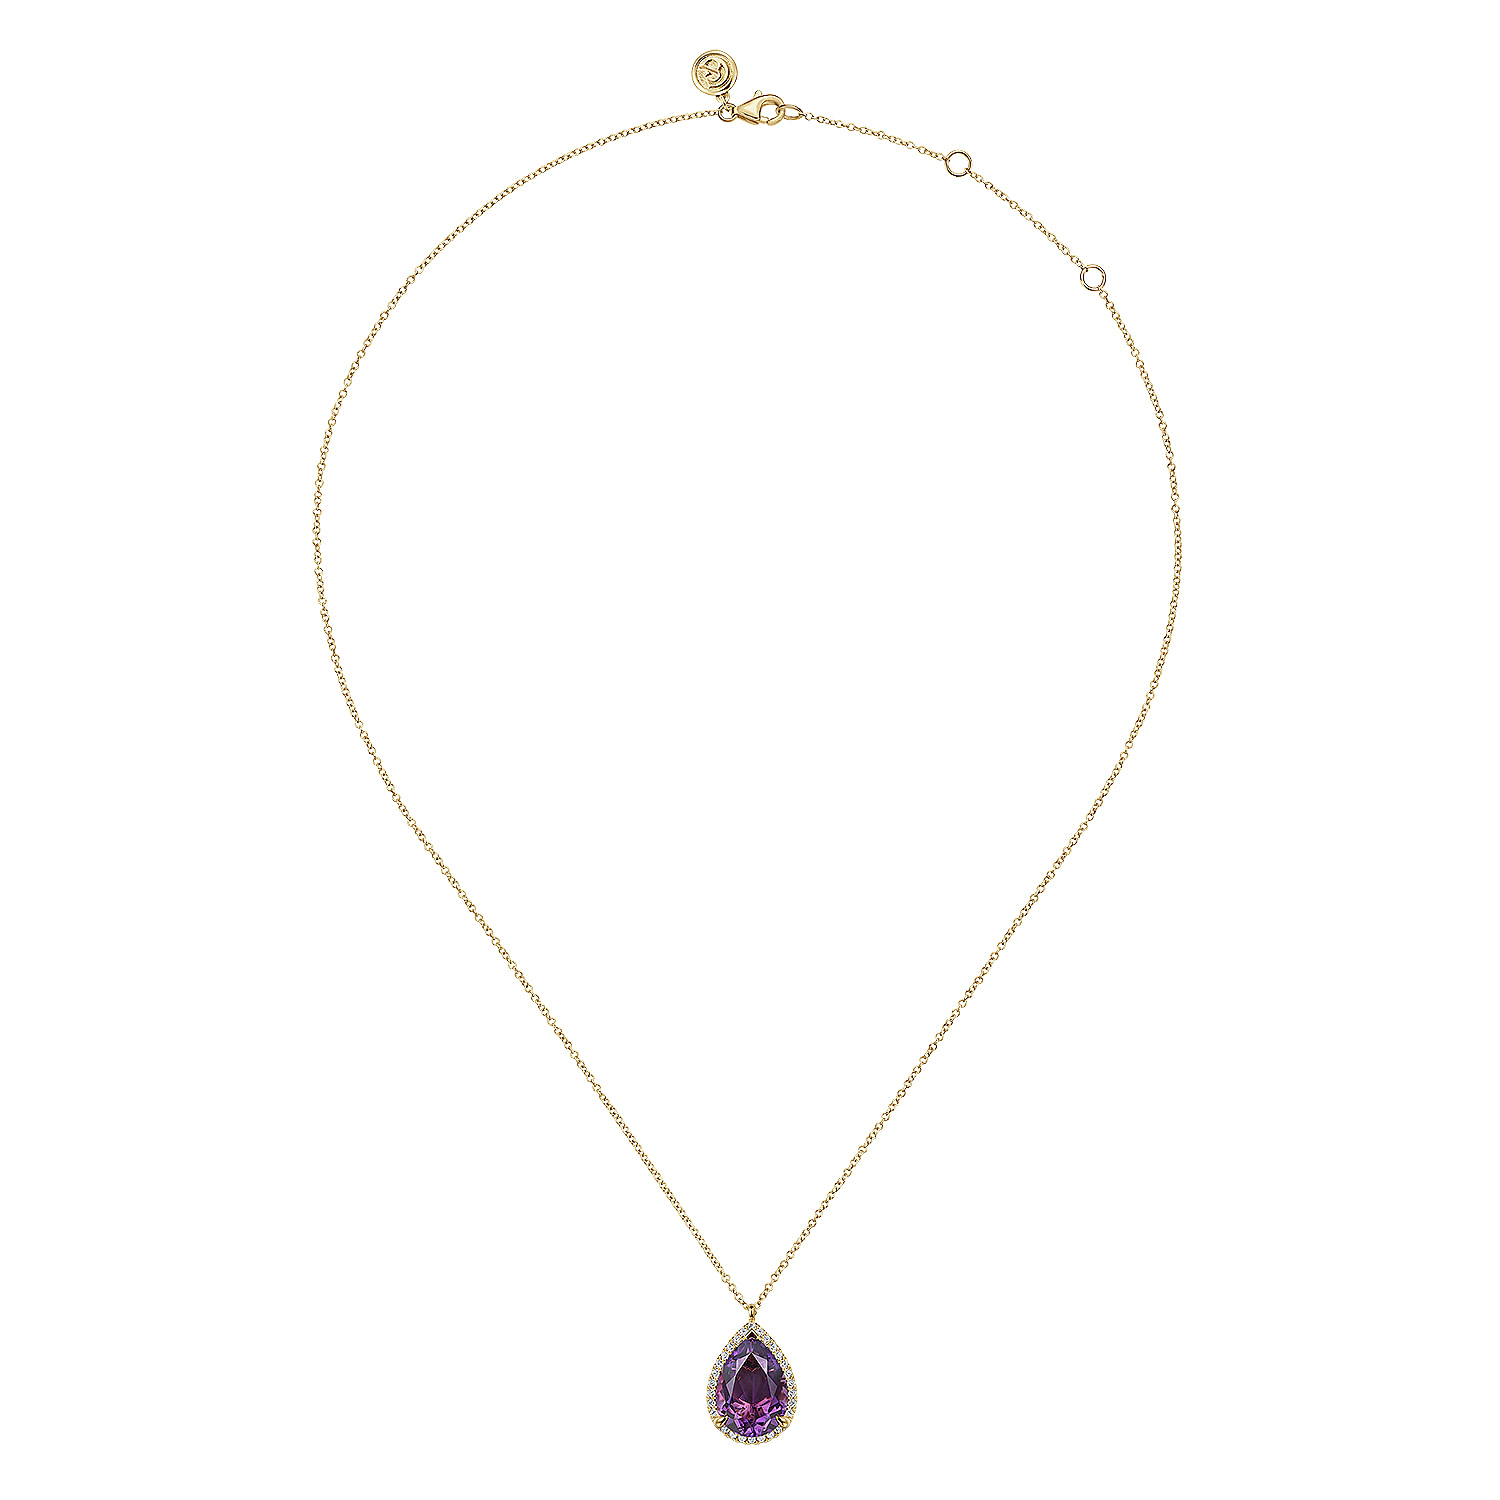 14K Yellow Gold Diamond and Flat Pear Shape Amethyst Necklace With Flower Pattern J-Back